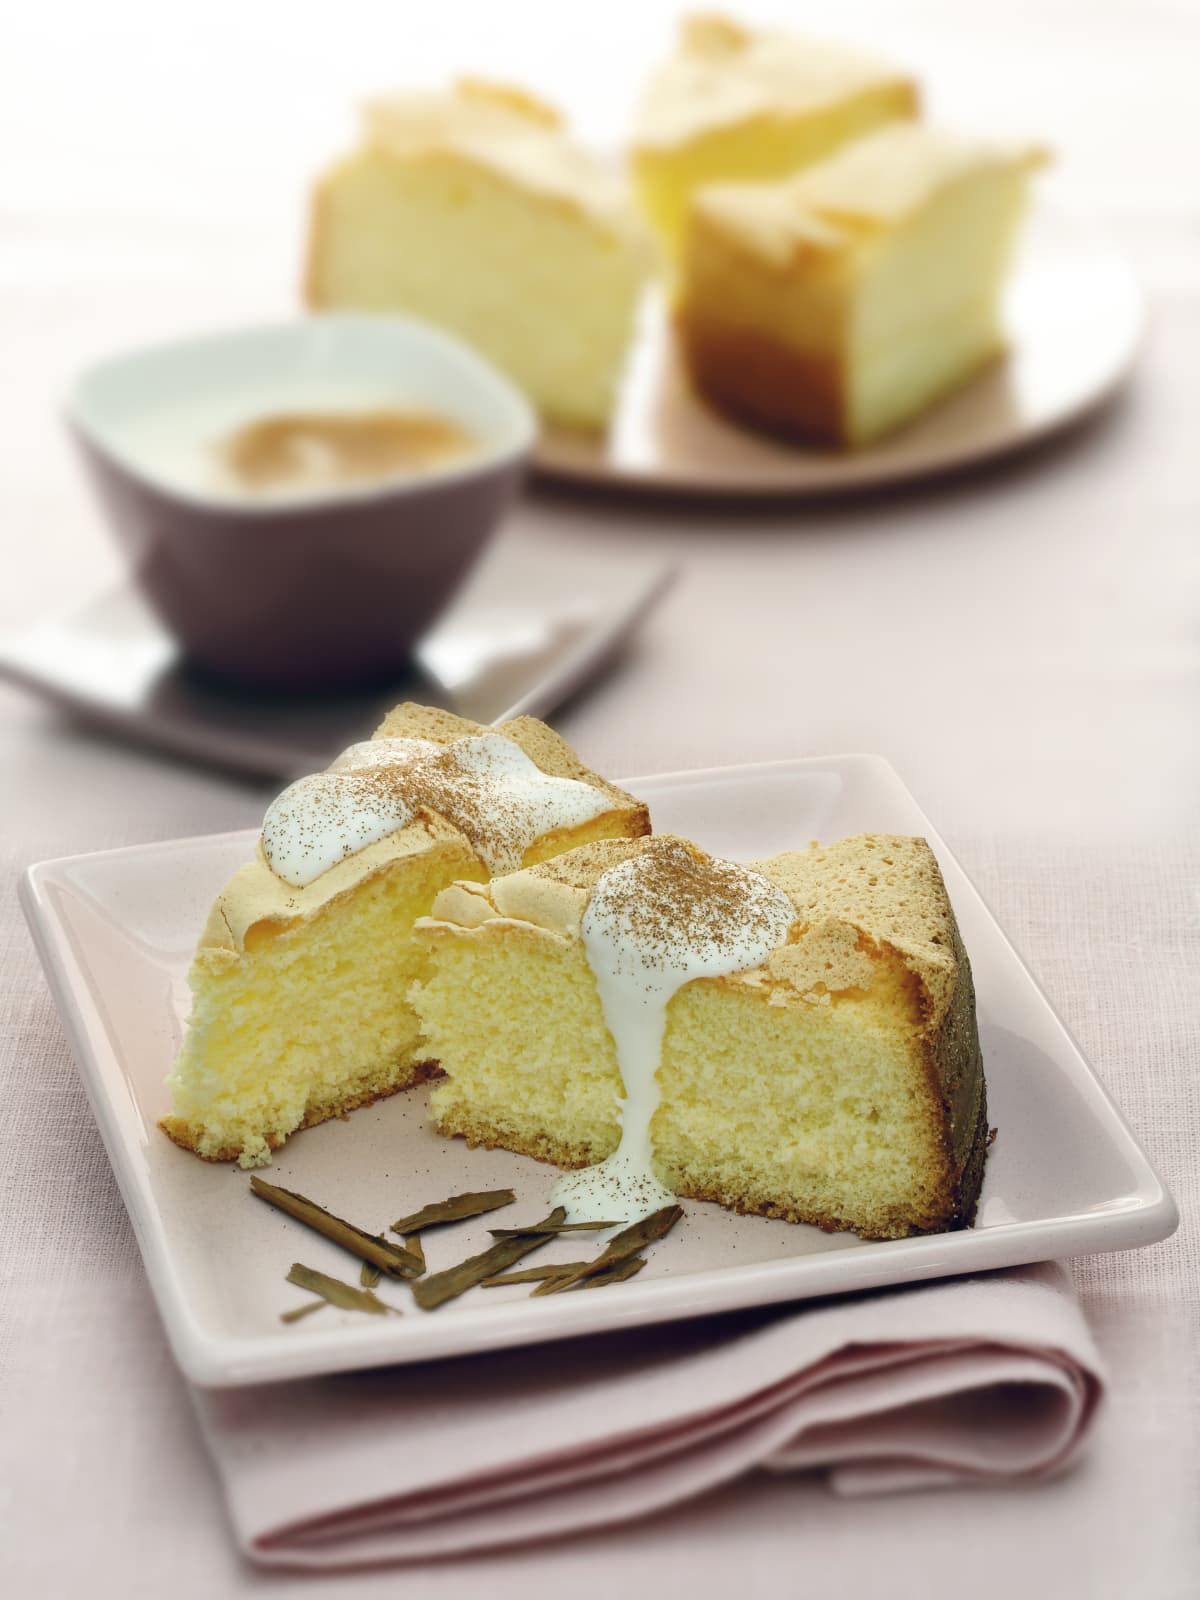 UNSPECIFIED - FEBRUARY 04: Sponge cake with cinnamon flavoured cream. (Photo by DeAgostini/Getty Images)